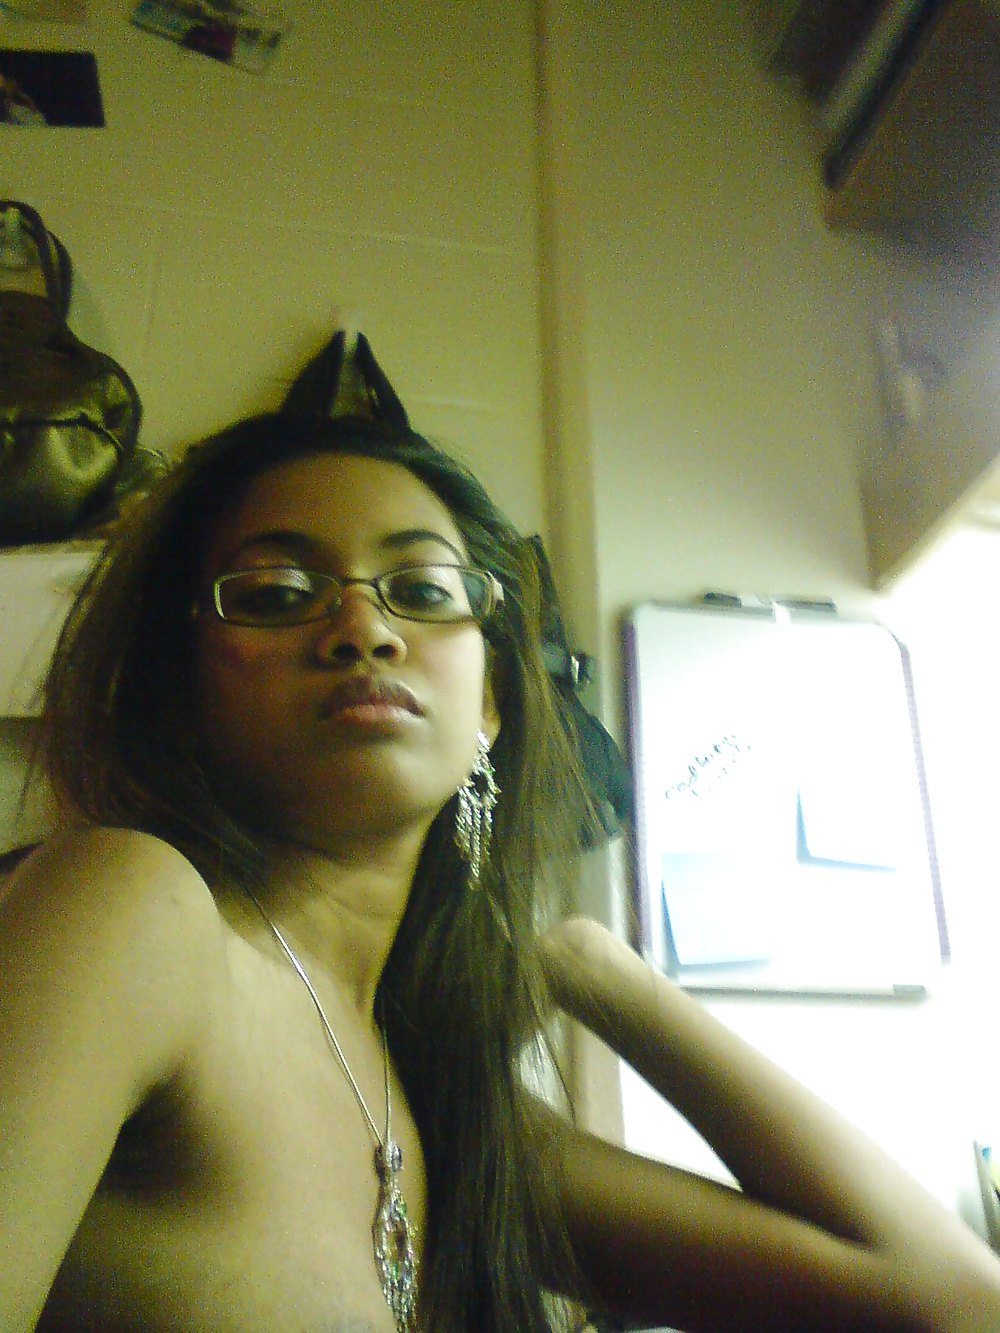 Sexy Black Chick With Glasses adult photos